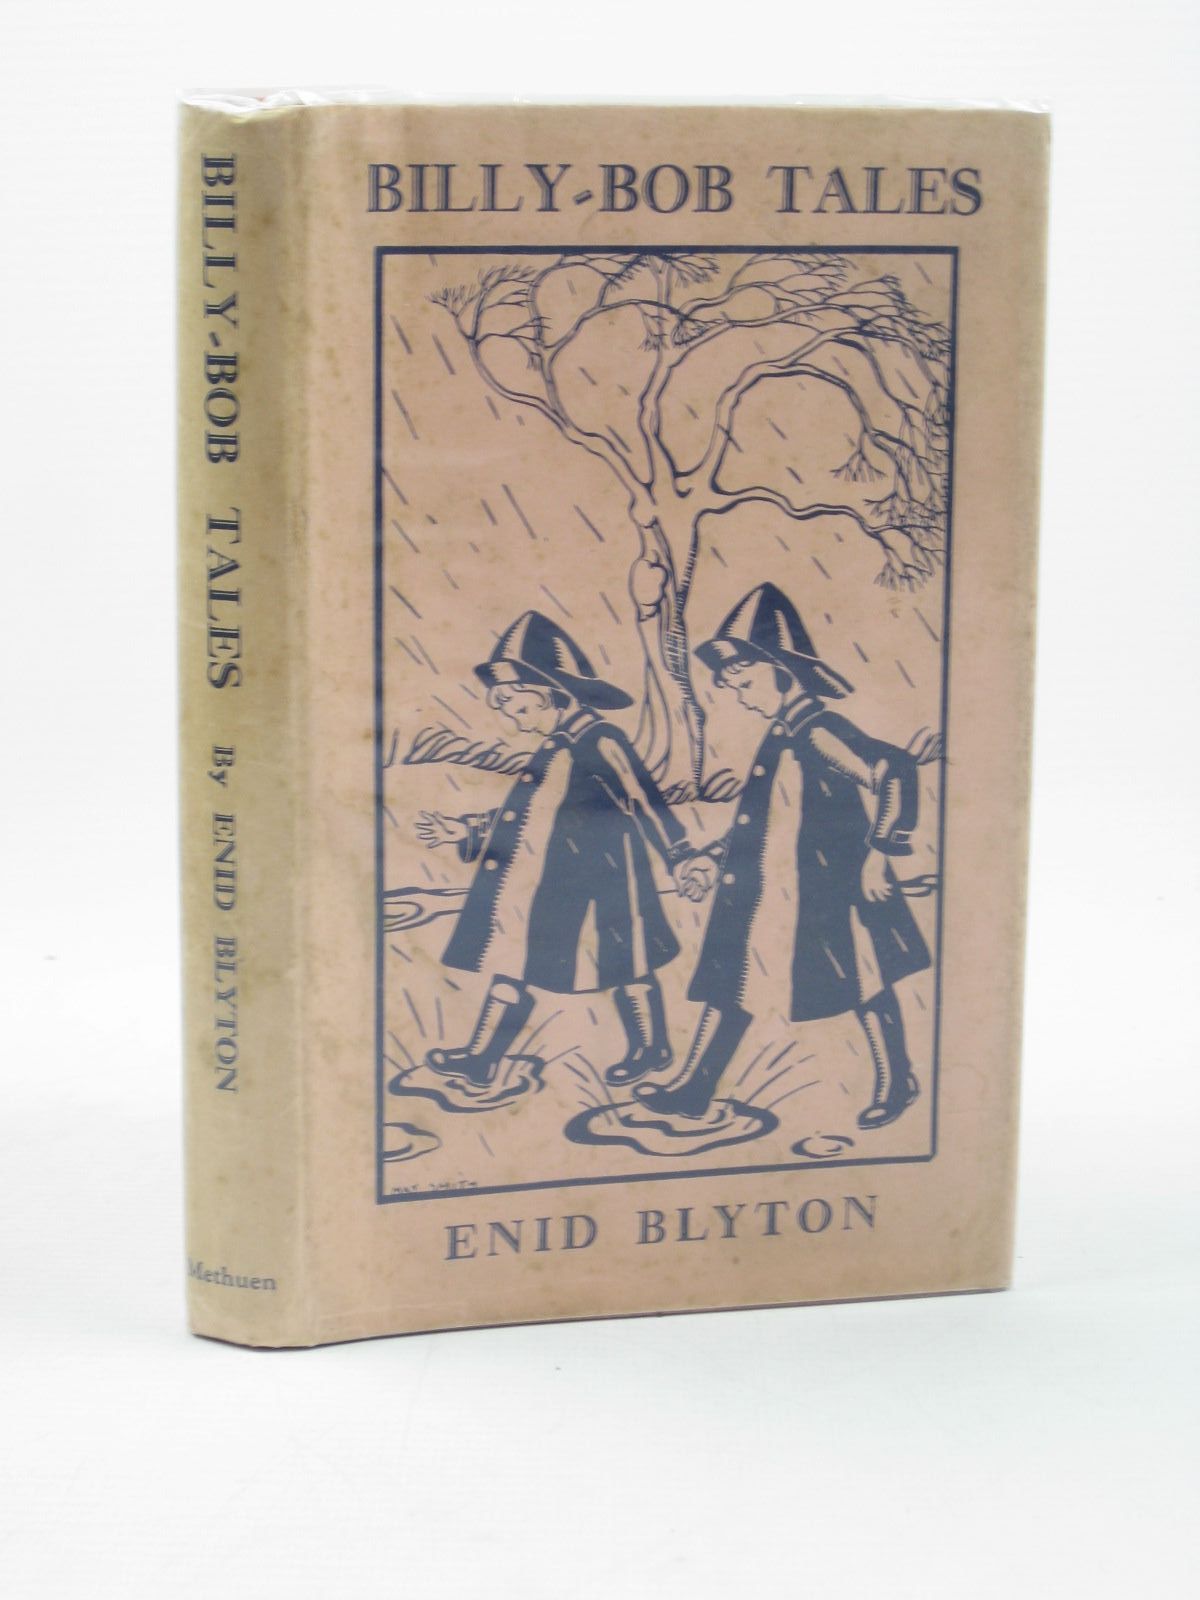 Photo of BILLY-BOB TALES written by Blyton, Enid illustrated by Smith, May published by Methuen & Co. Ltd. (STOCK CODE: 1311995)  for sale by Stella & Rose's Books